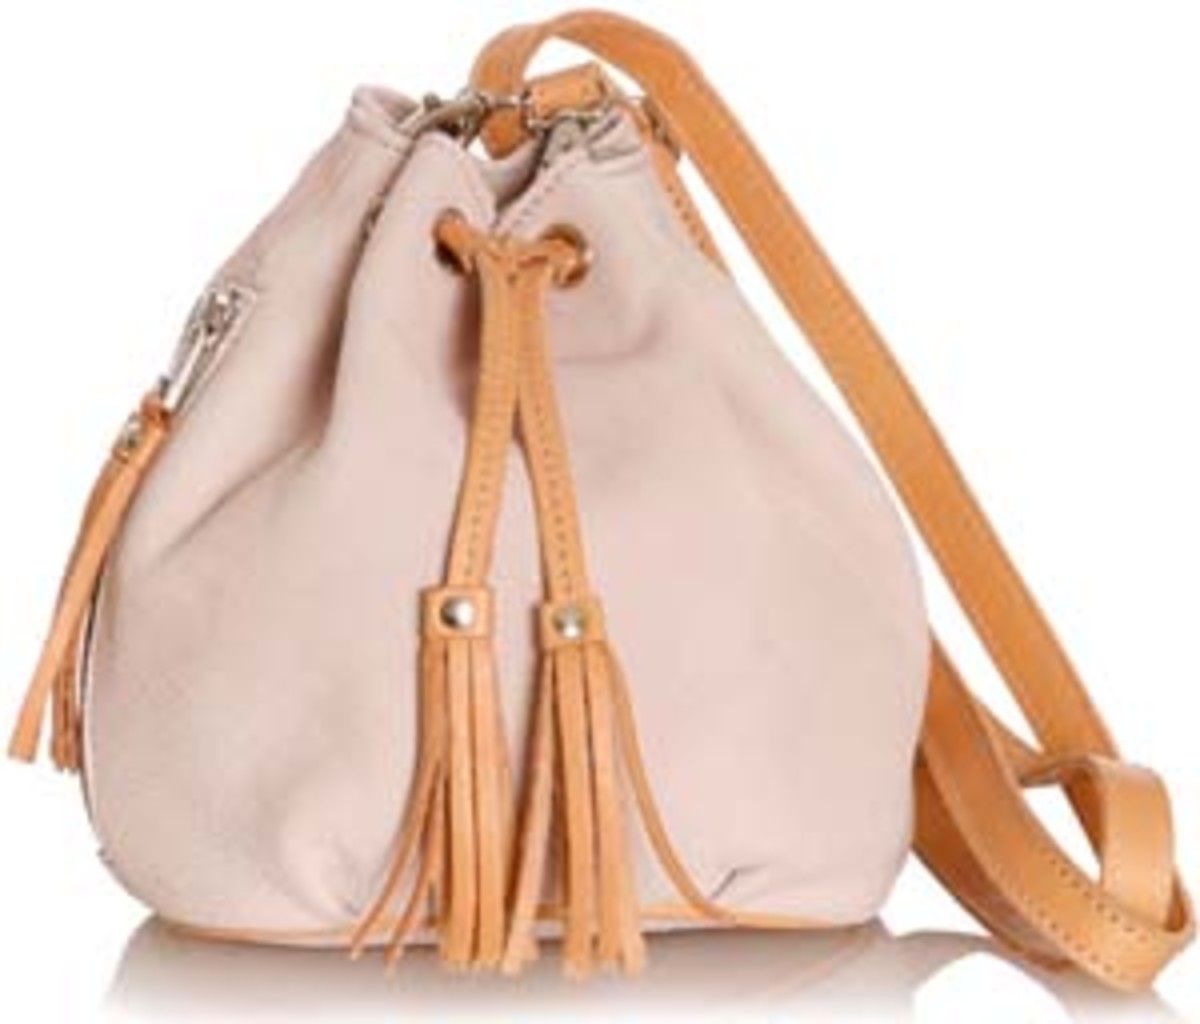 Roots Disco Pouch in Blush $128